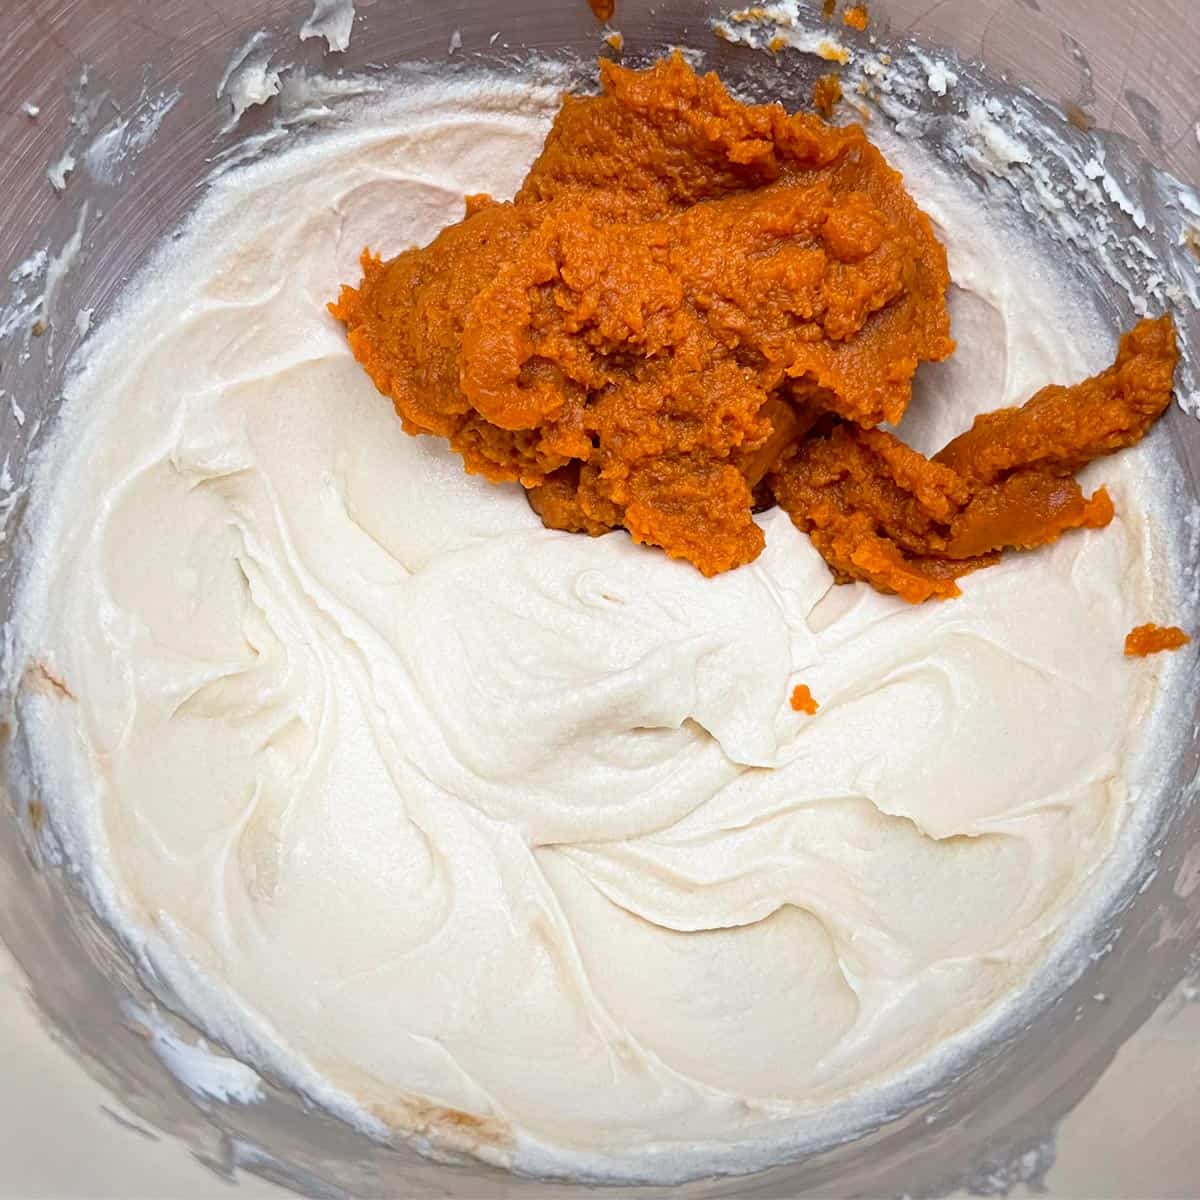 Add pumpkin puree to creamy-looking butter and cream cheese to be mixed.